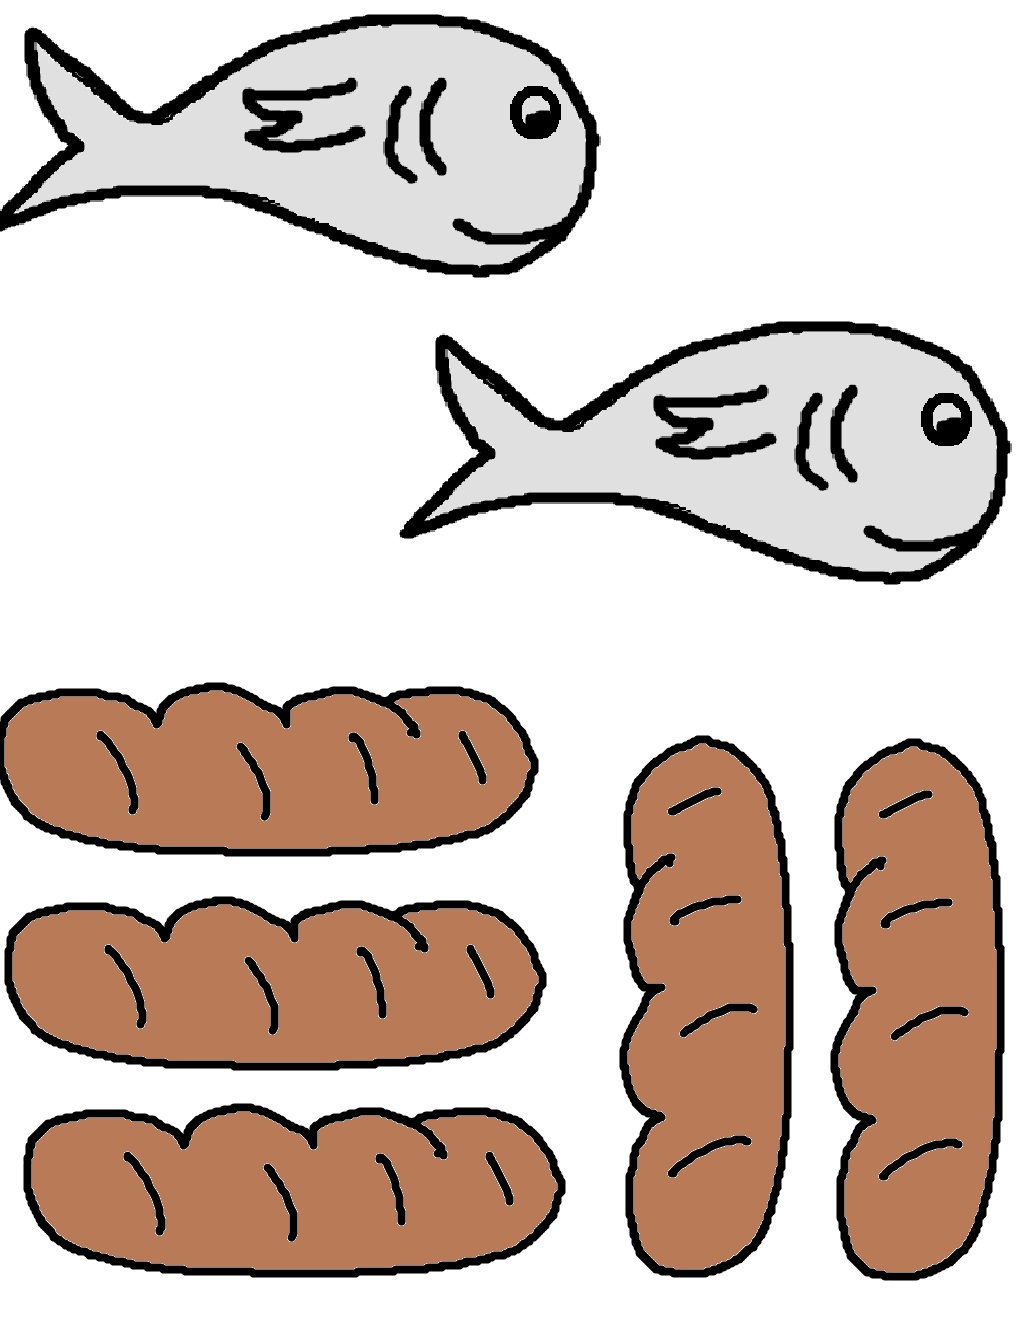 two-fish-and-five-loaves-of-bread-craft-bread-poster